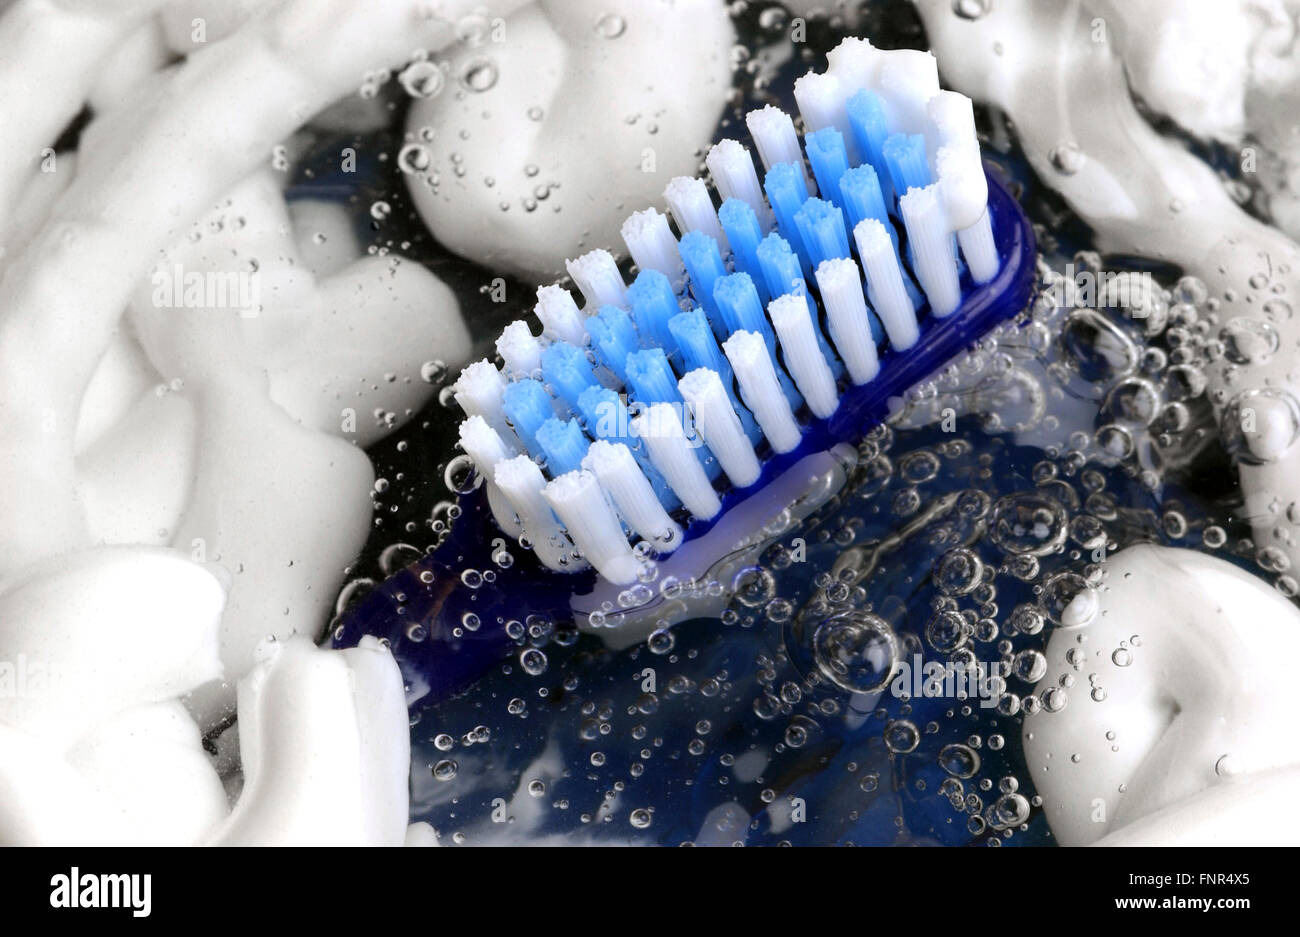 A blue toothbrush lying in a pool of toothpaste and water. Stock Photo